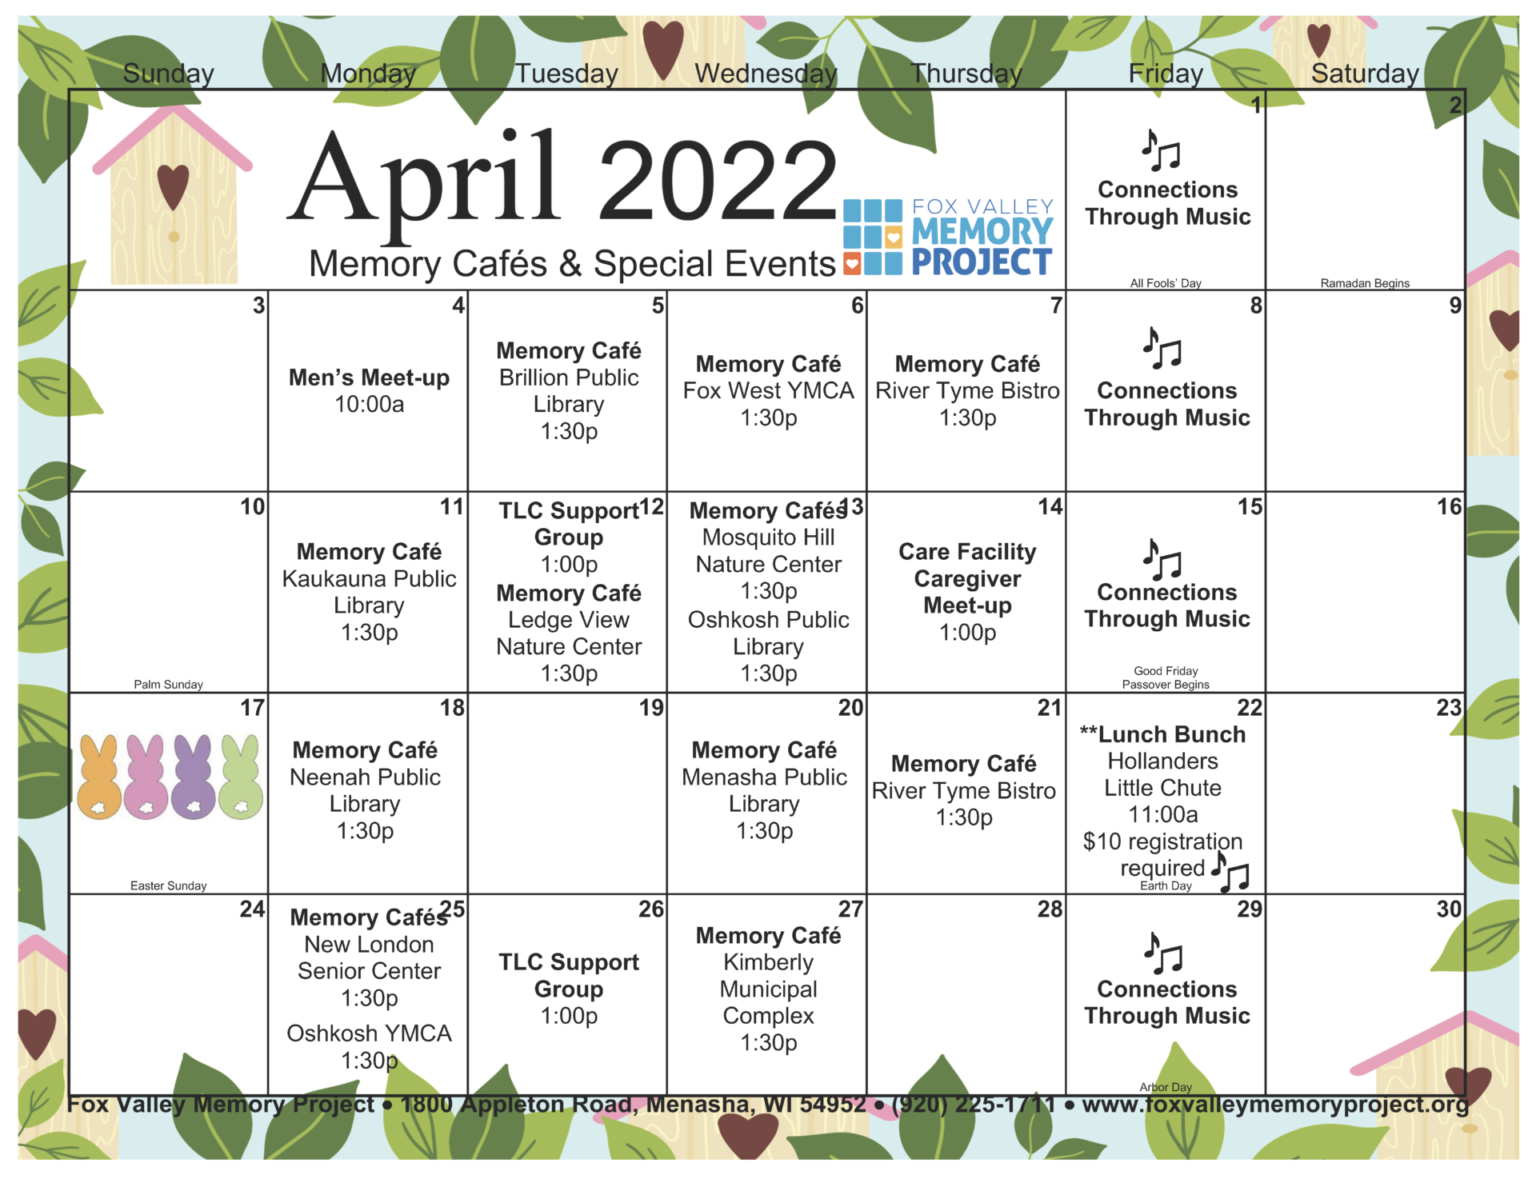 Fox Valley Memory Project April Events